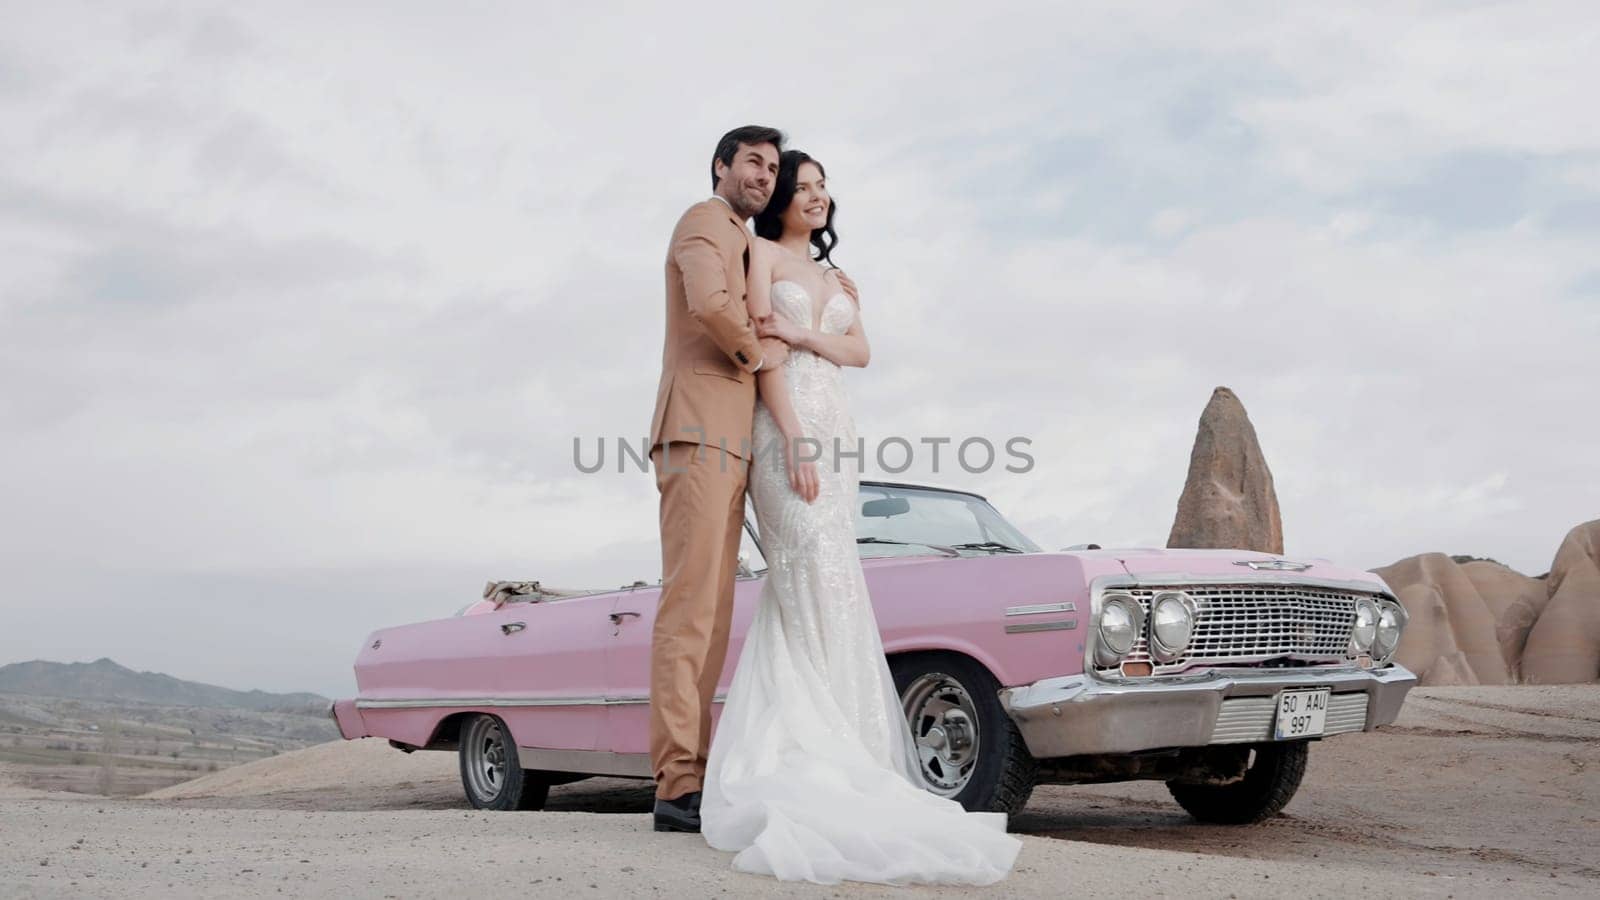 Elegant wedding photo shoot. Action. A beautiful bride in a wedding dress with a groom in a brown suit posing for a photographer on camera with happy faces in the desert next to a pink small car.